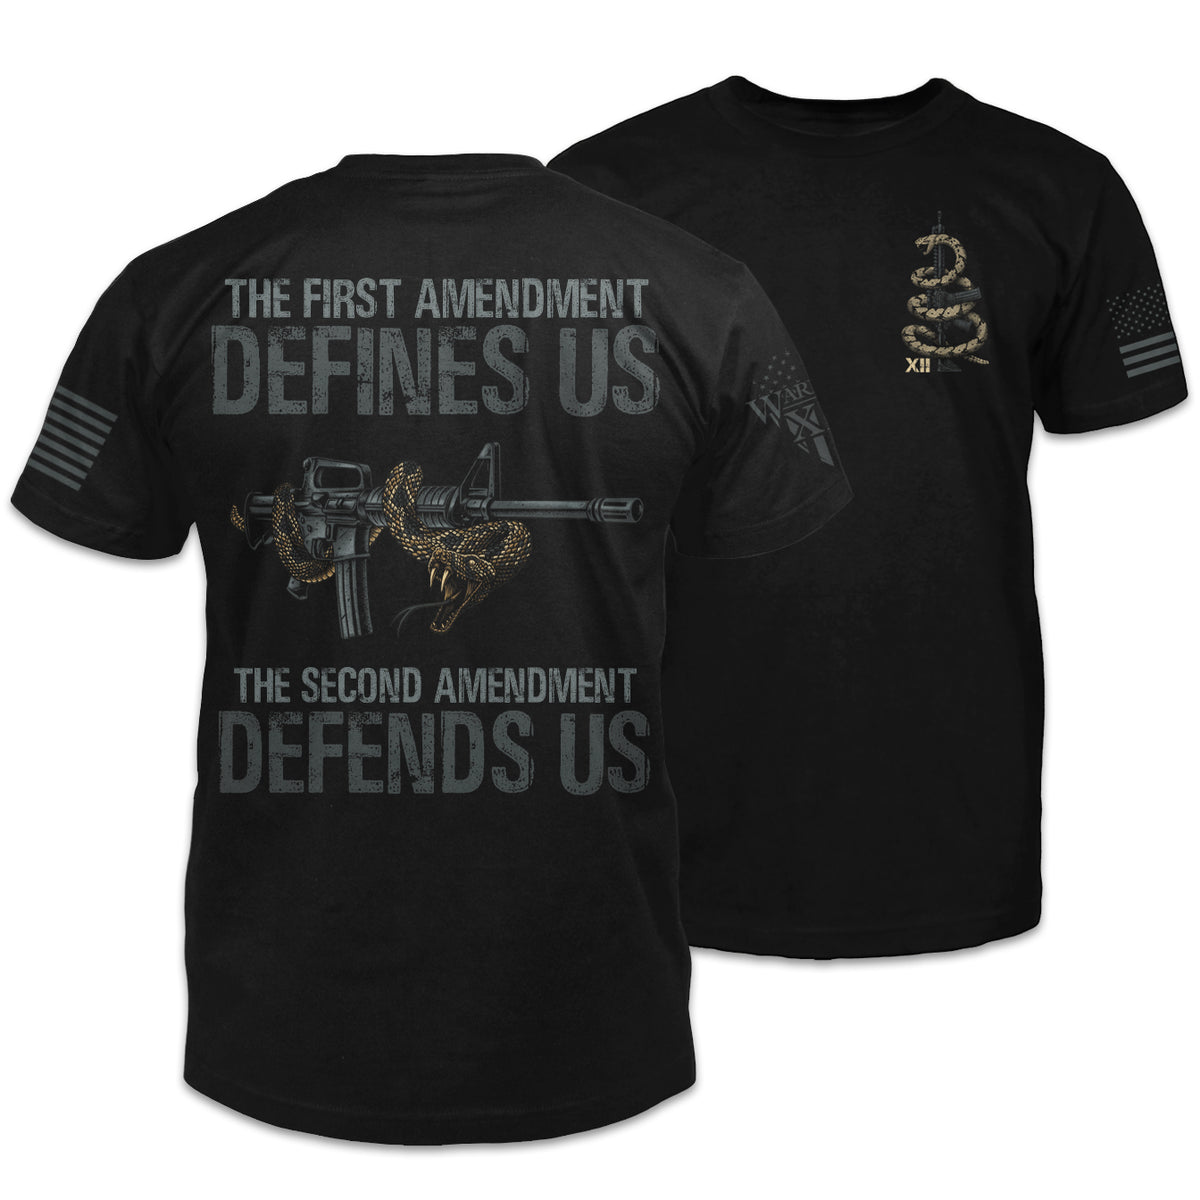 The front and back of a black t-shirt. The back features an image of a rattlesnake coiled around a rifle with the words "The First Amendment defines us, the Second Amendment defends us." The front of the shirt features a small pocket image in a rattlesnake coiled around a rifle.